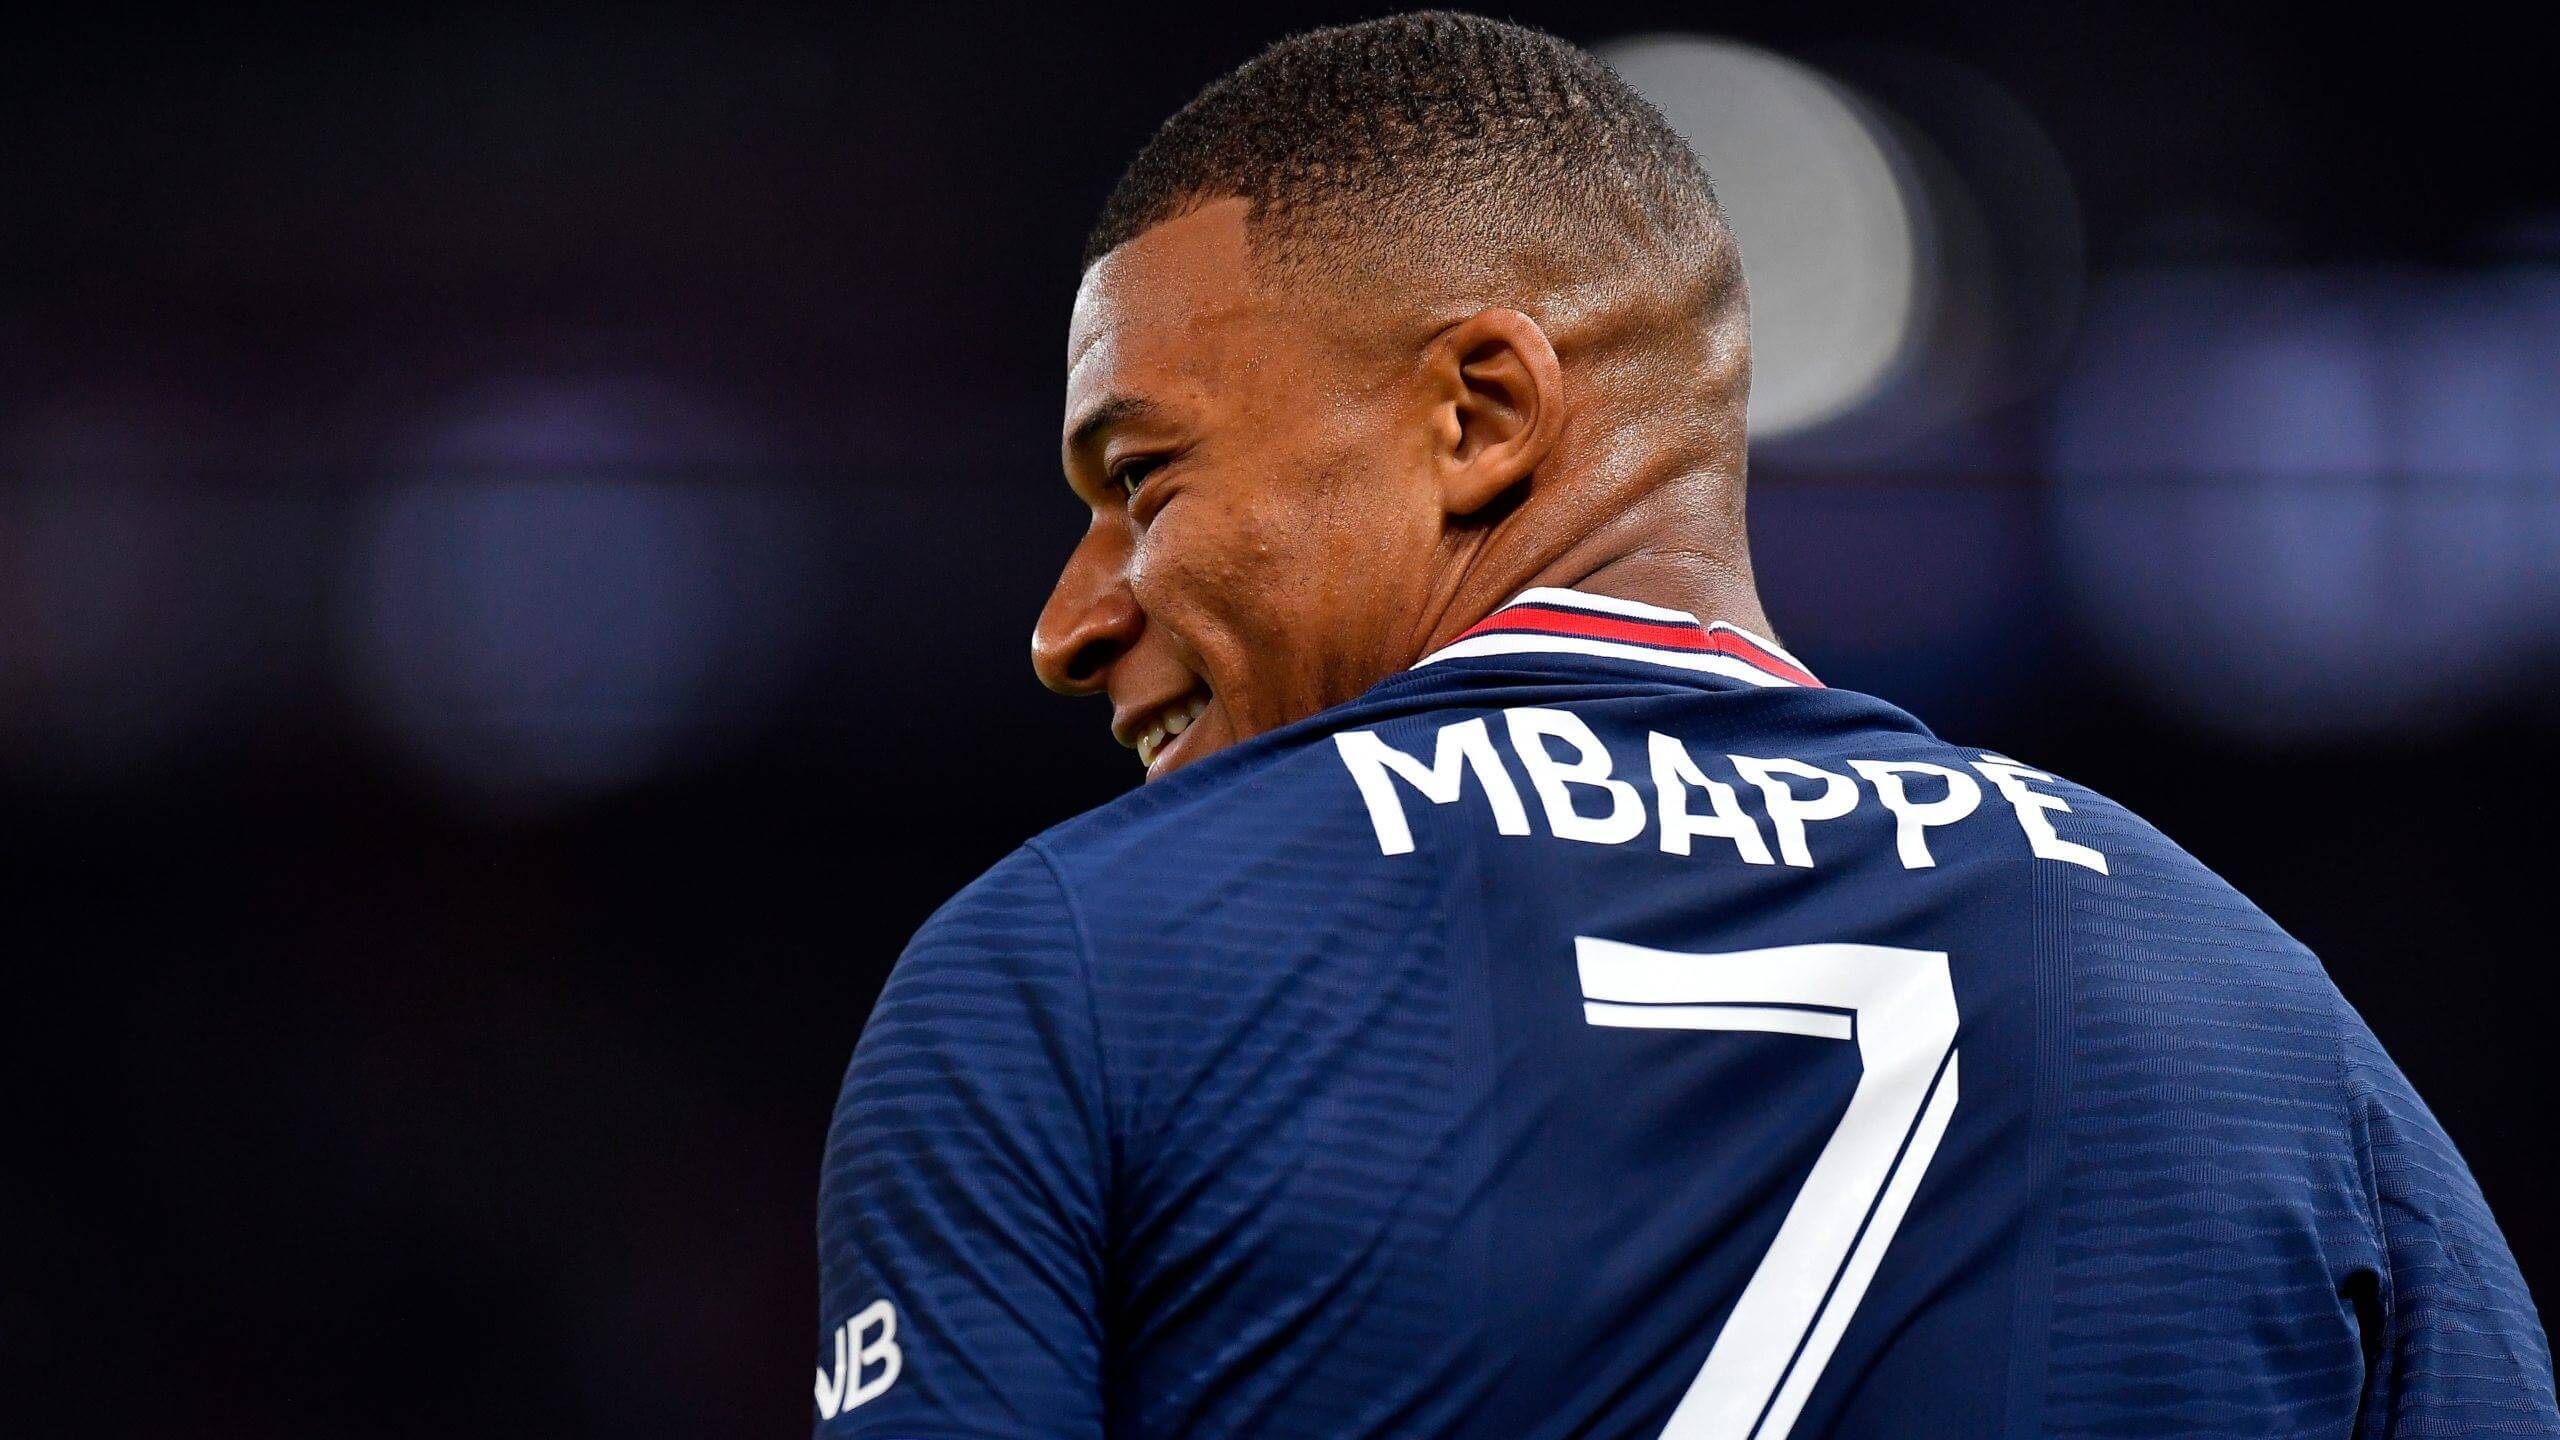 picture of Mbappe